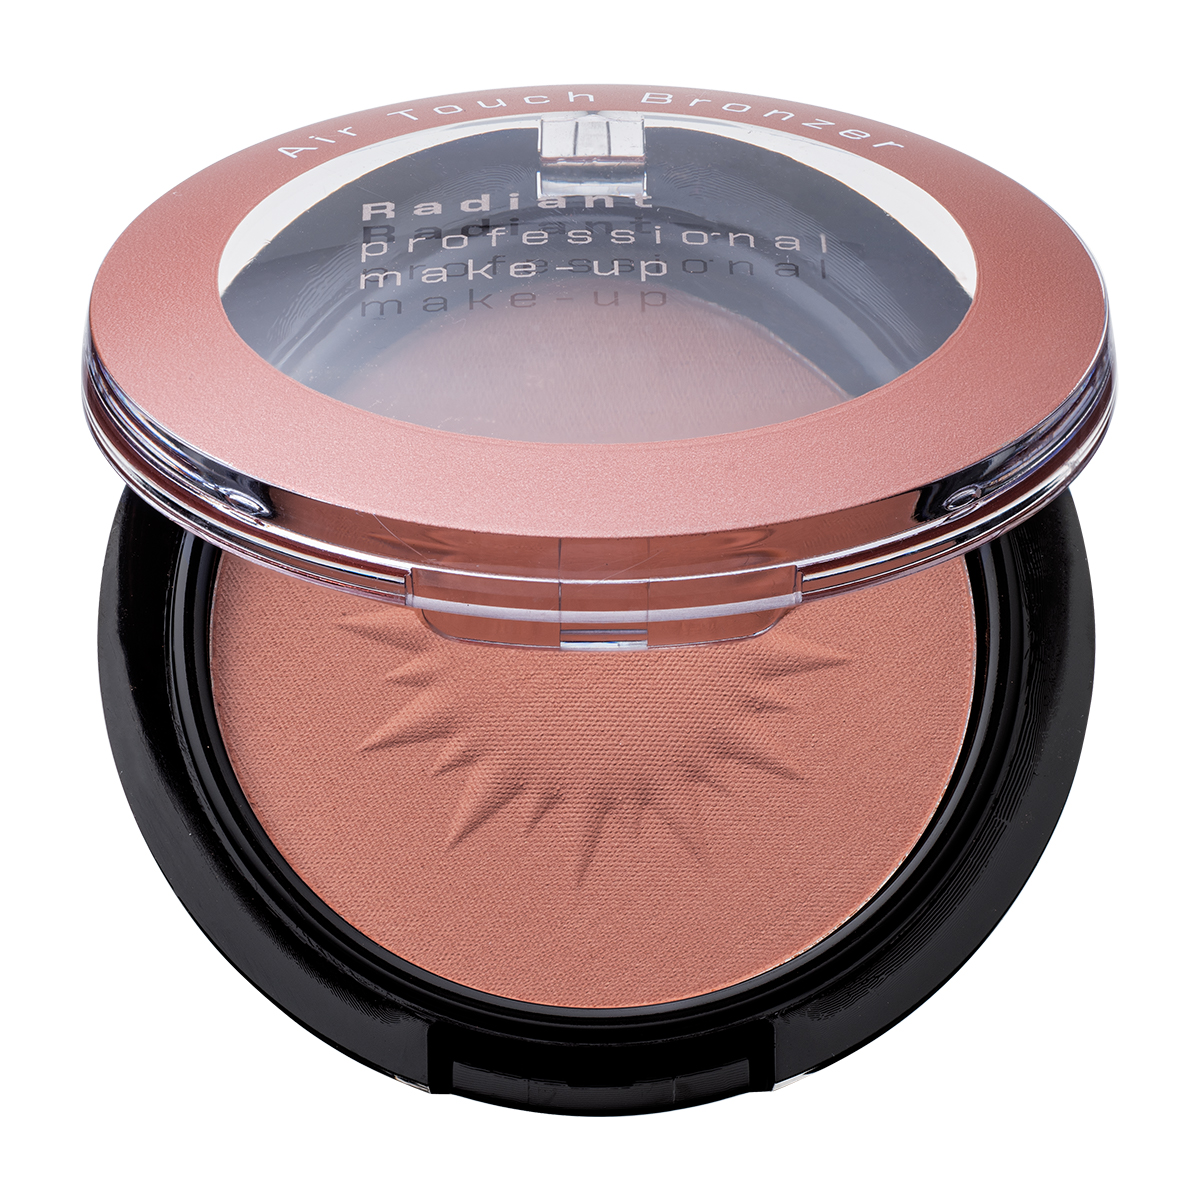 AIR TOUCH BRONZER No 02 L.A. LIGHTS *Limited Edition*